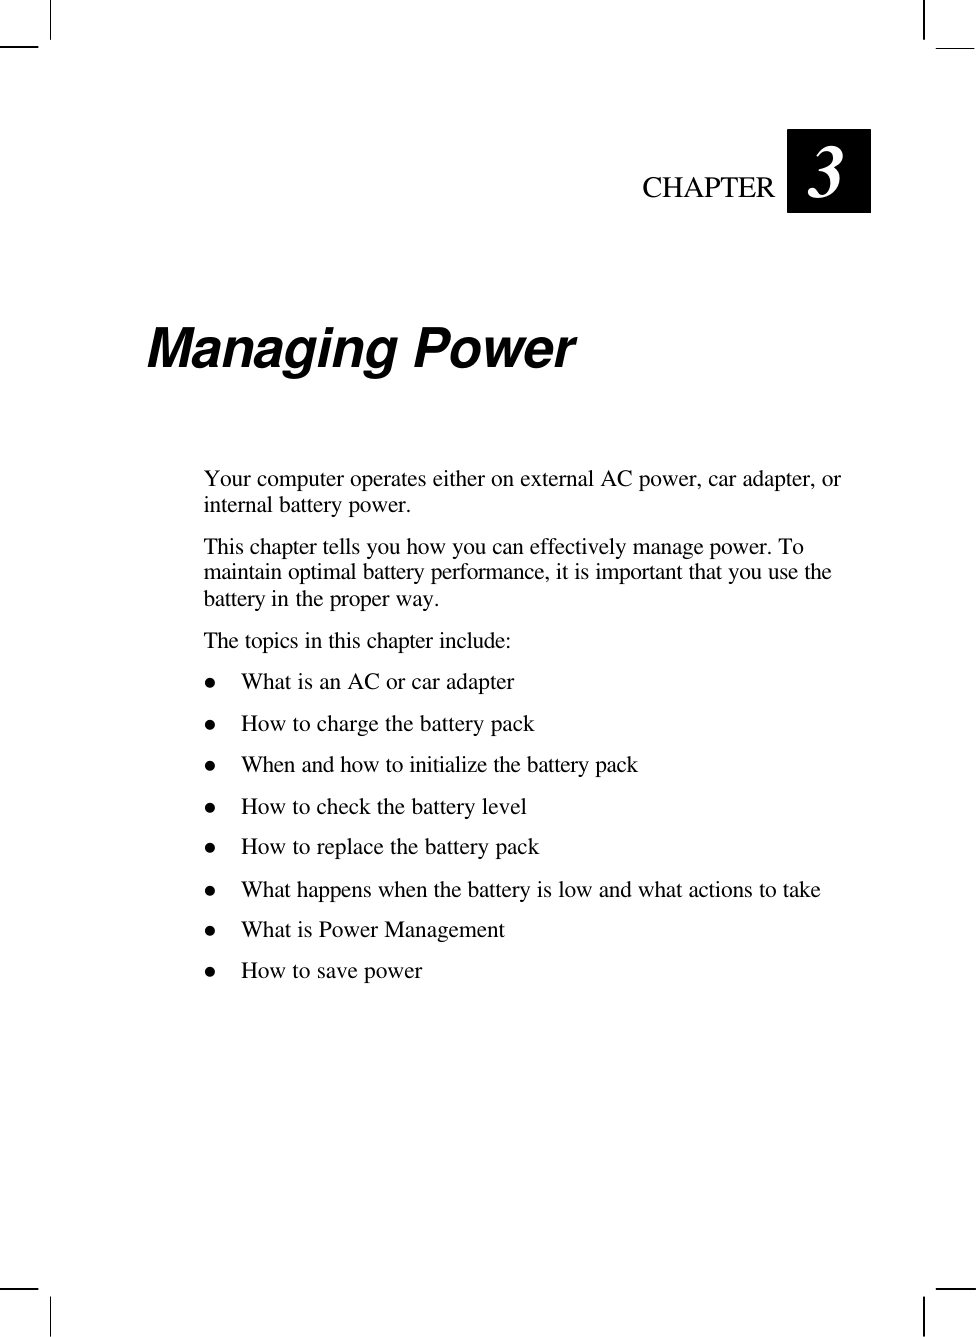   CHAPTER 3 Managing Power Your computer operates either on external AC power, car adapter, or internal battery power. This chapter tells you how you can effectively manage power. To maintain optimal battery performance, it is important that you use the battery in the proper way. The topics in this chapter include: l What is an AC or car adapter l How to charge the battery pack l When and how to initialize the battery pack l How to check the battery level l How to replace the battery pack l What happens when the battery is low and what actions to take l What is Power Management l How to save power 